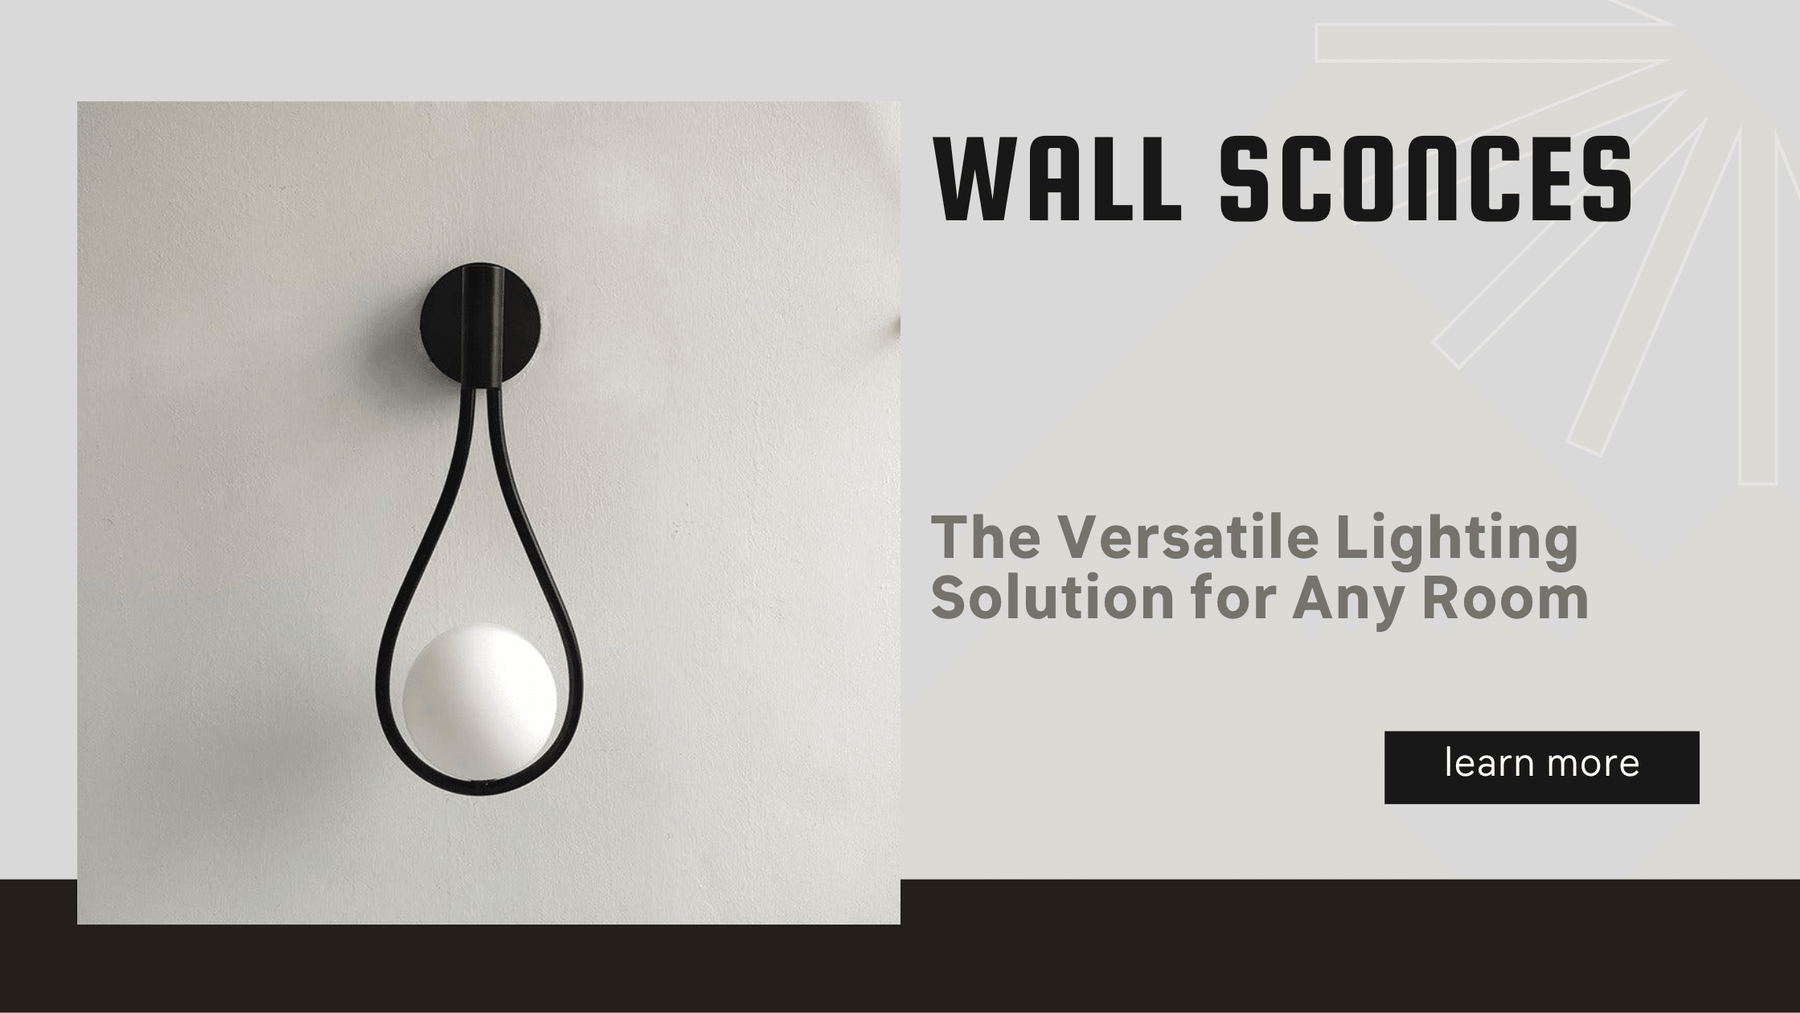 Wall Sconces: The Versatile Lighting Solution for Any Room